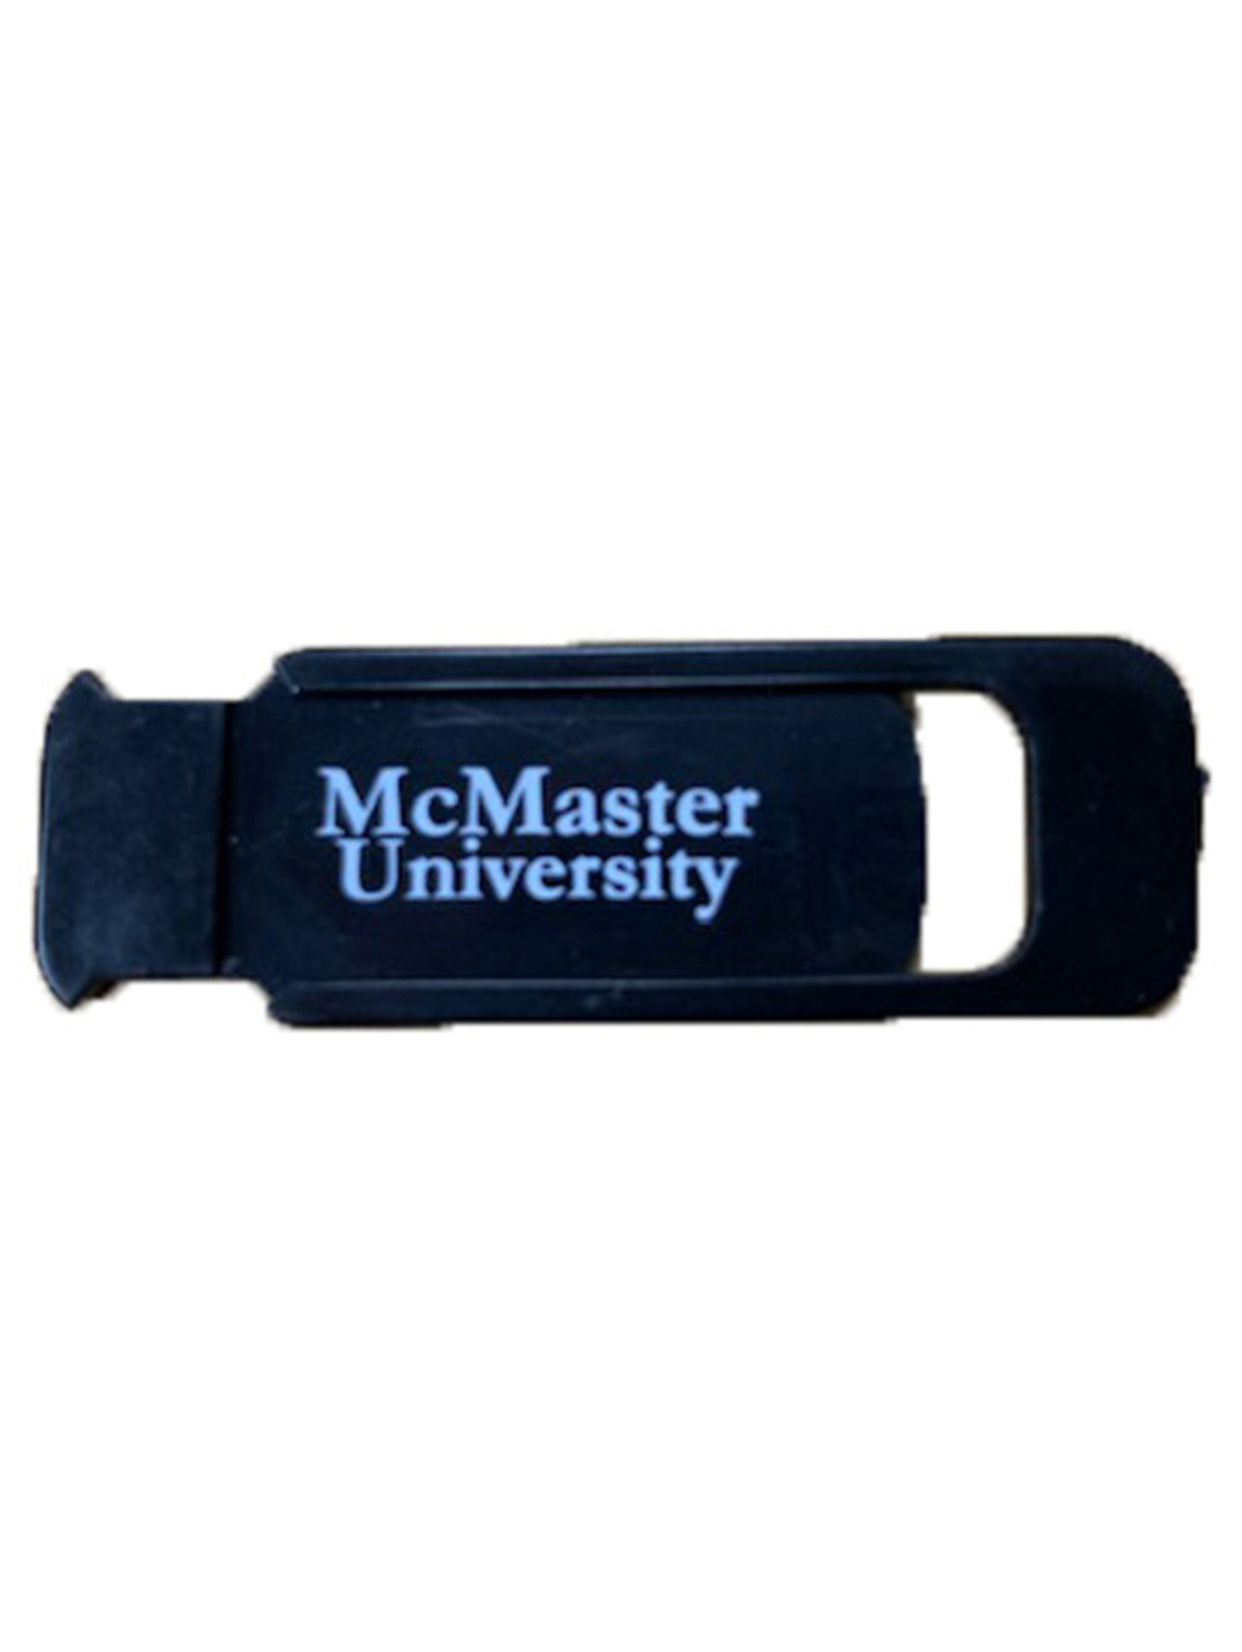 MCMASTER UNIVERSITY WEBCAM PRIVACY COVER - #7734447